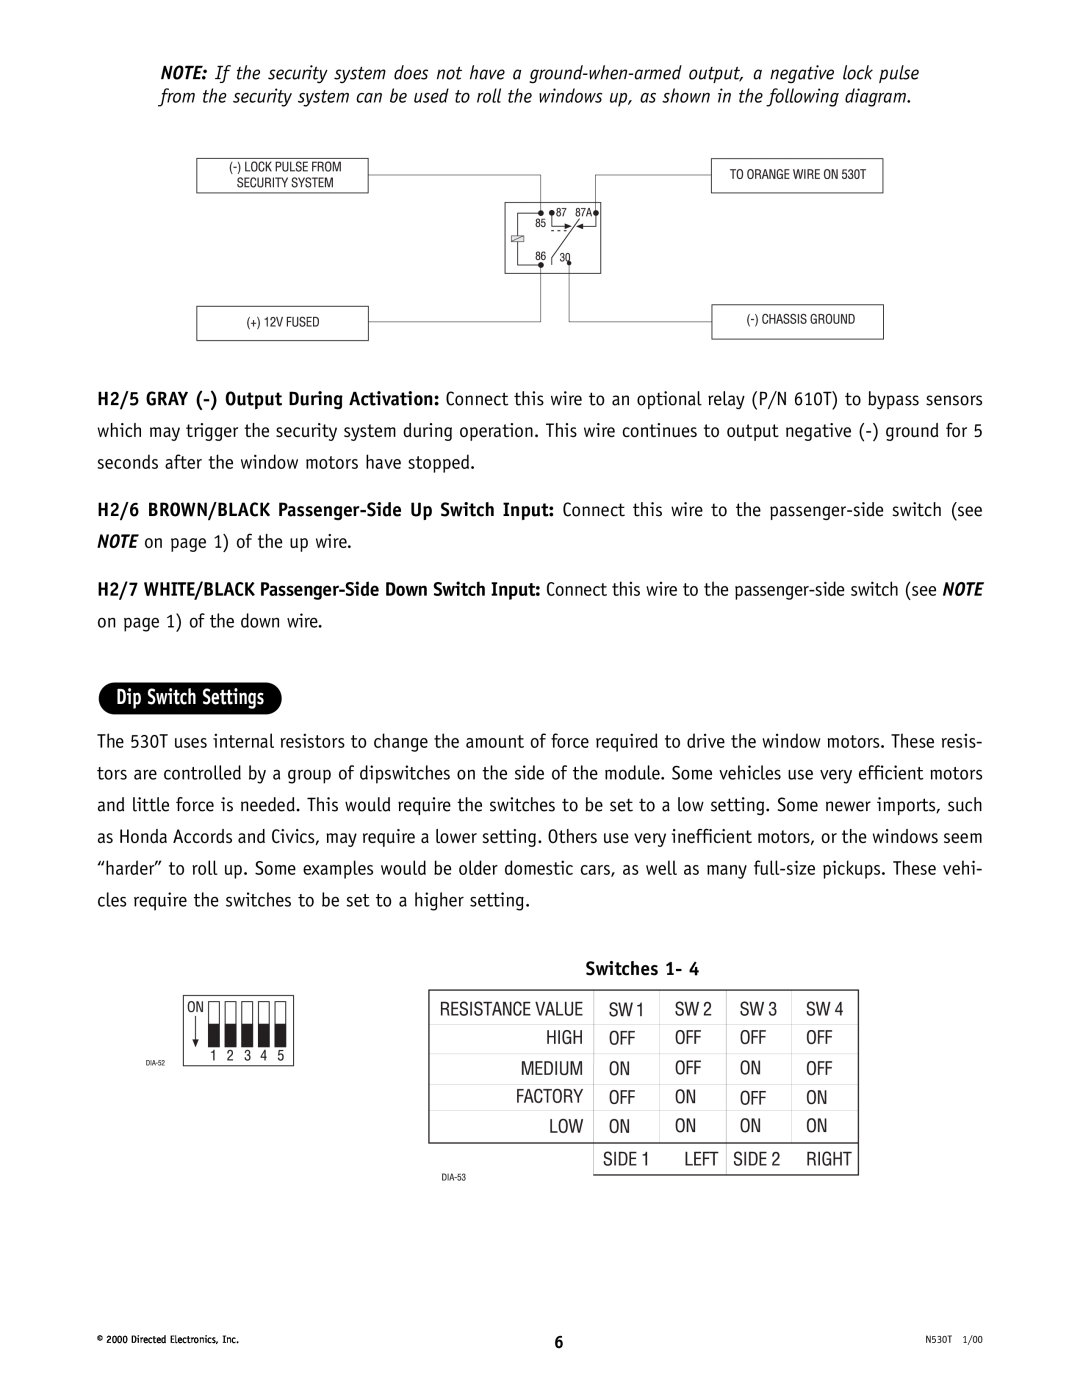 Directed Electronics 530T manual Dip Switch Settings 